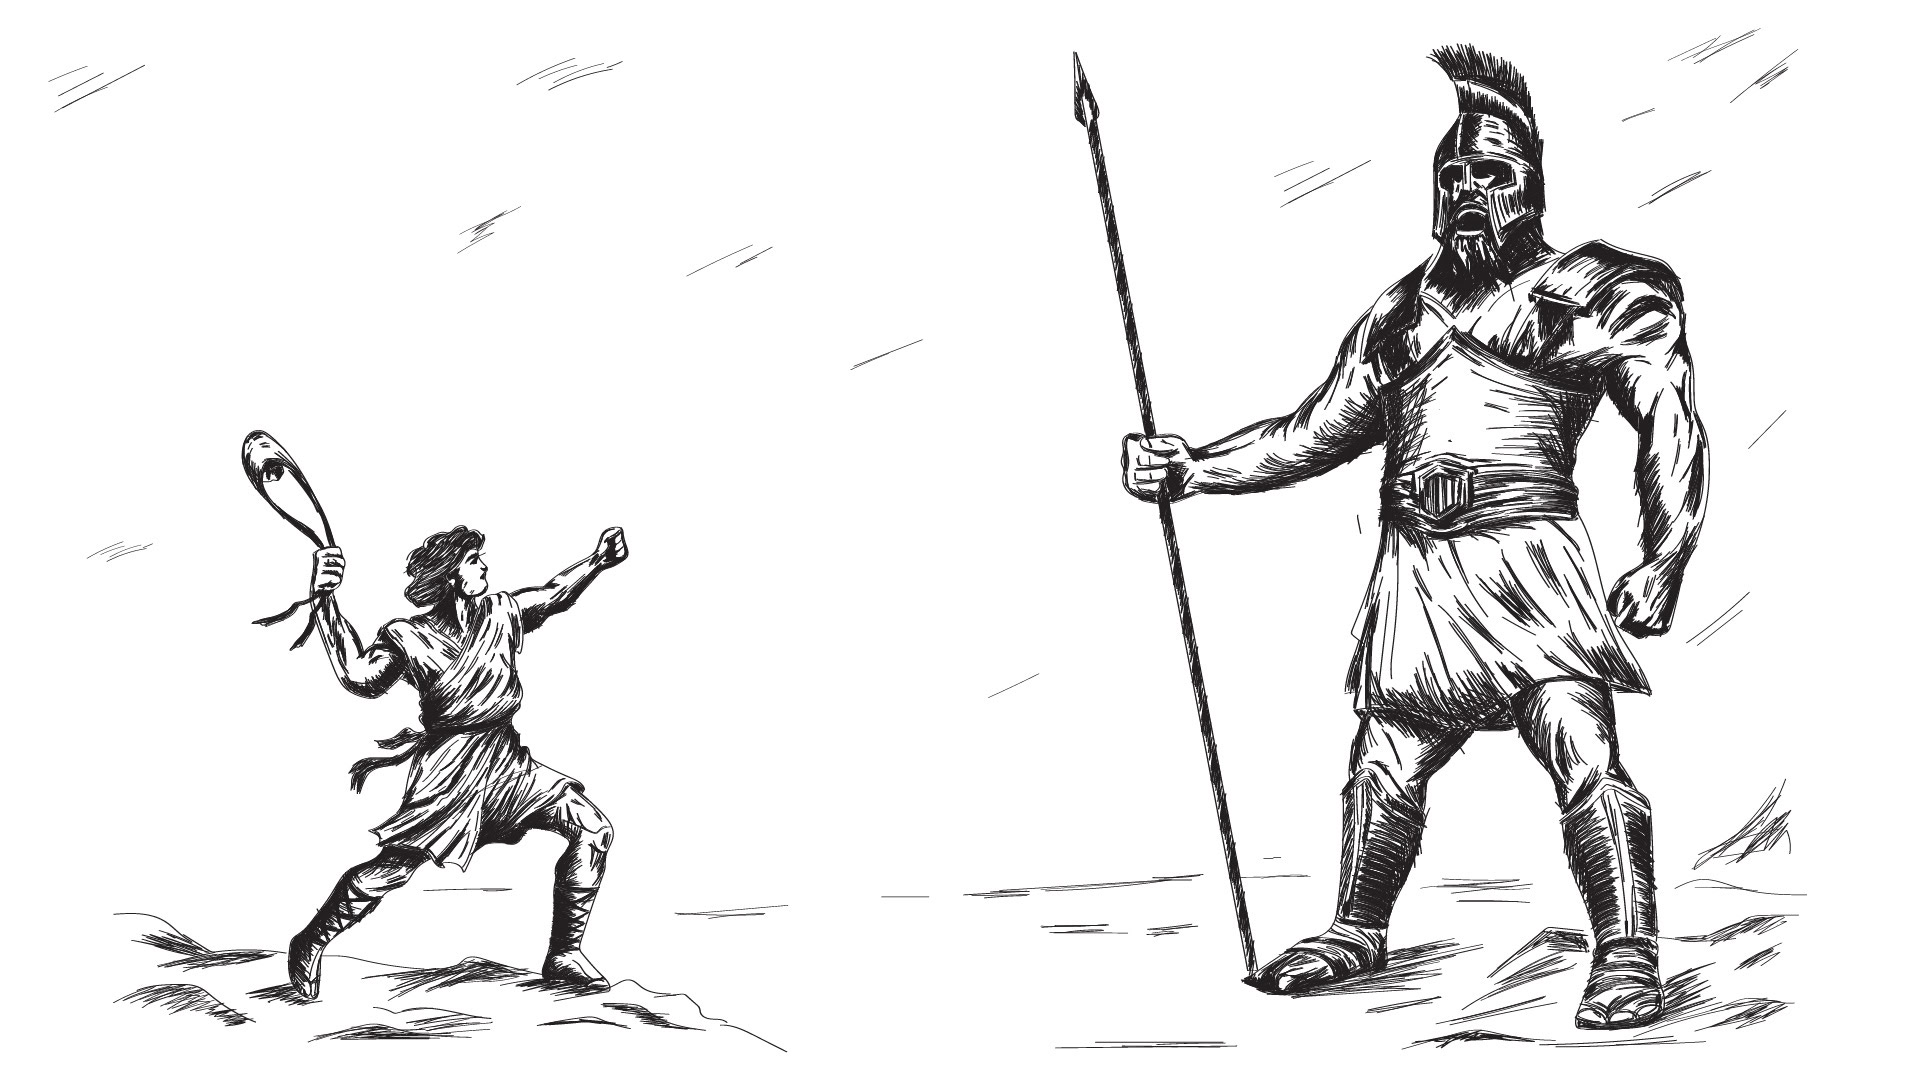 An illustration of two warriors in combat.